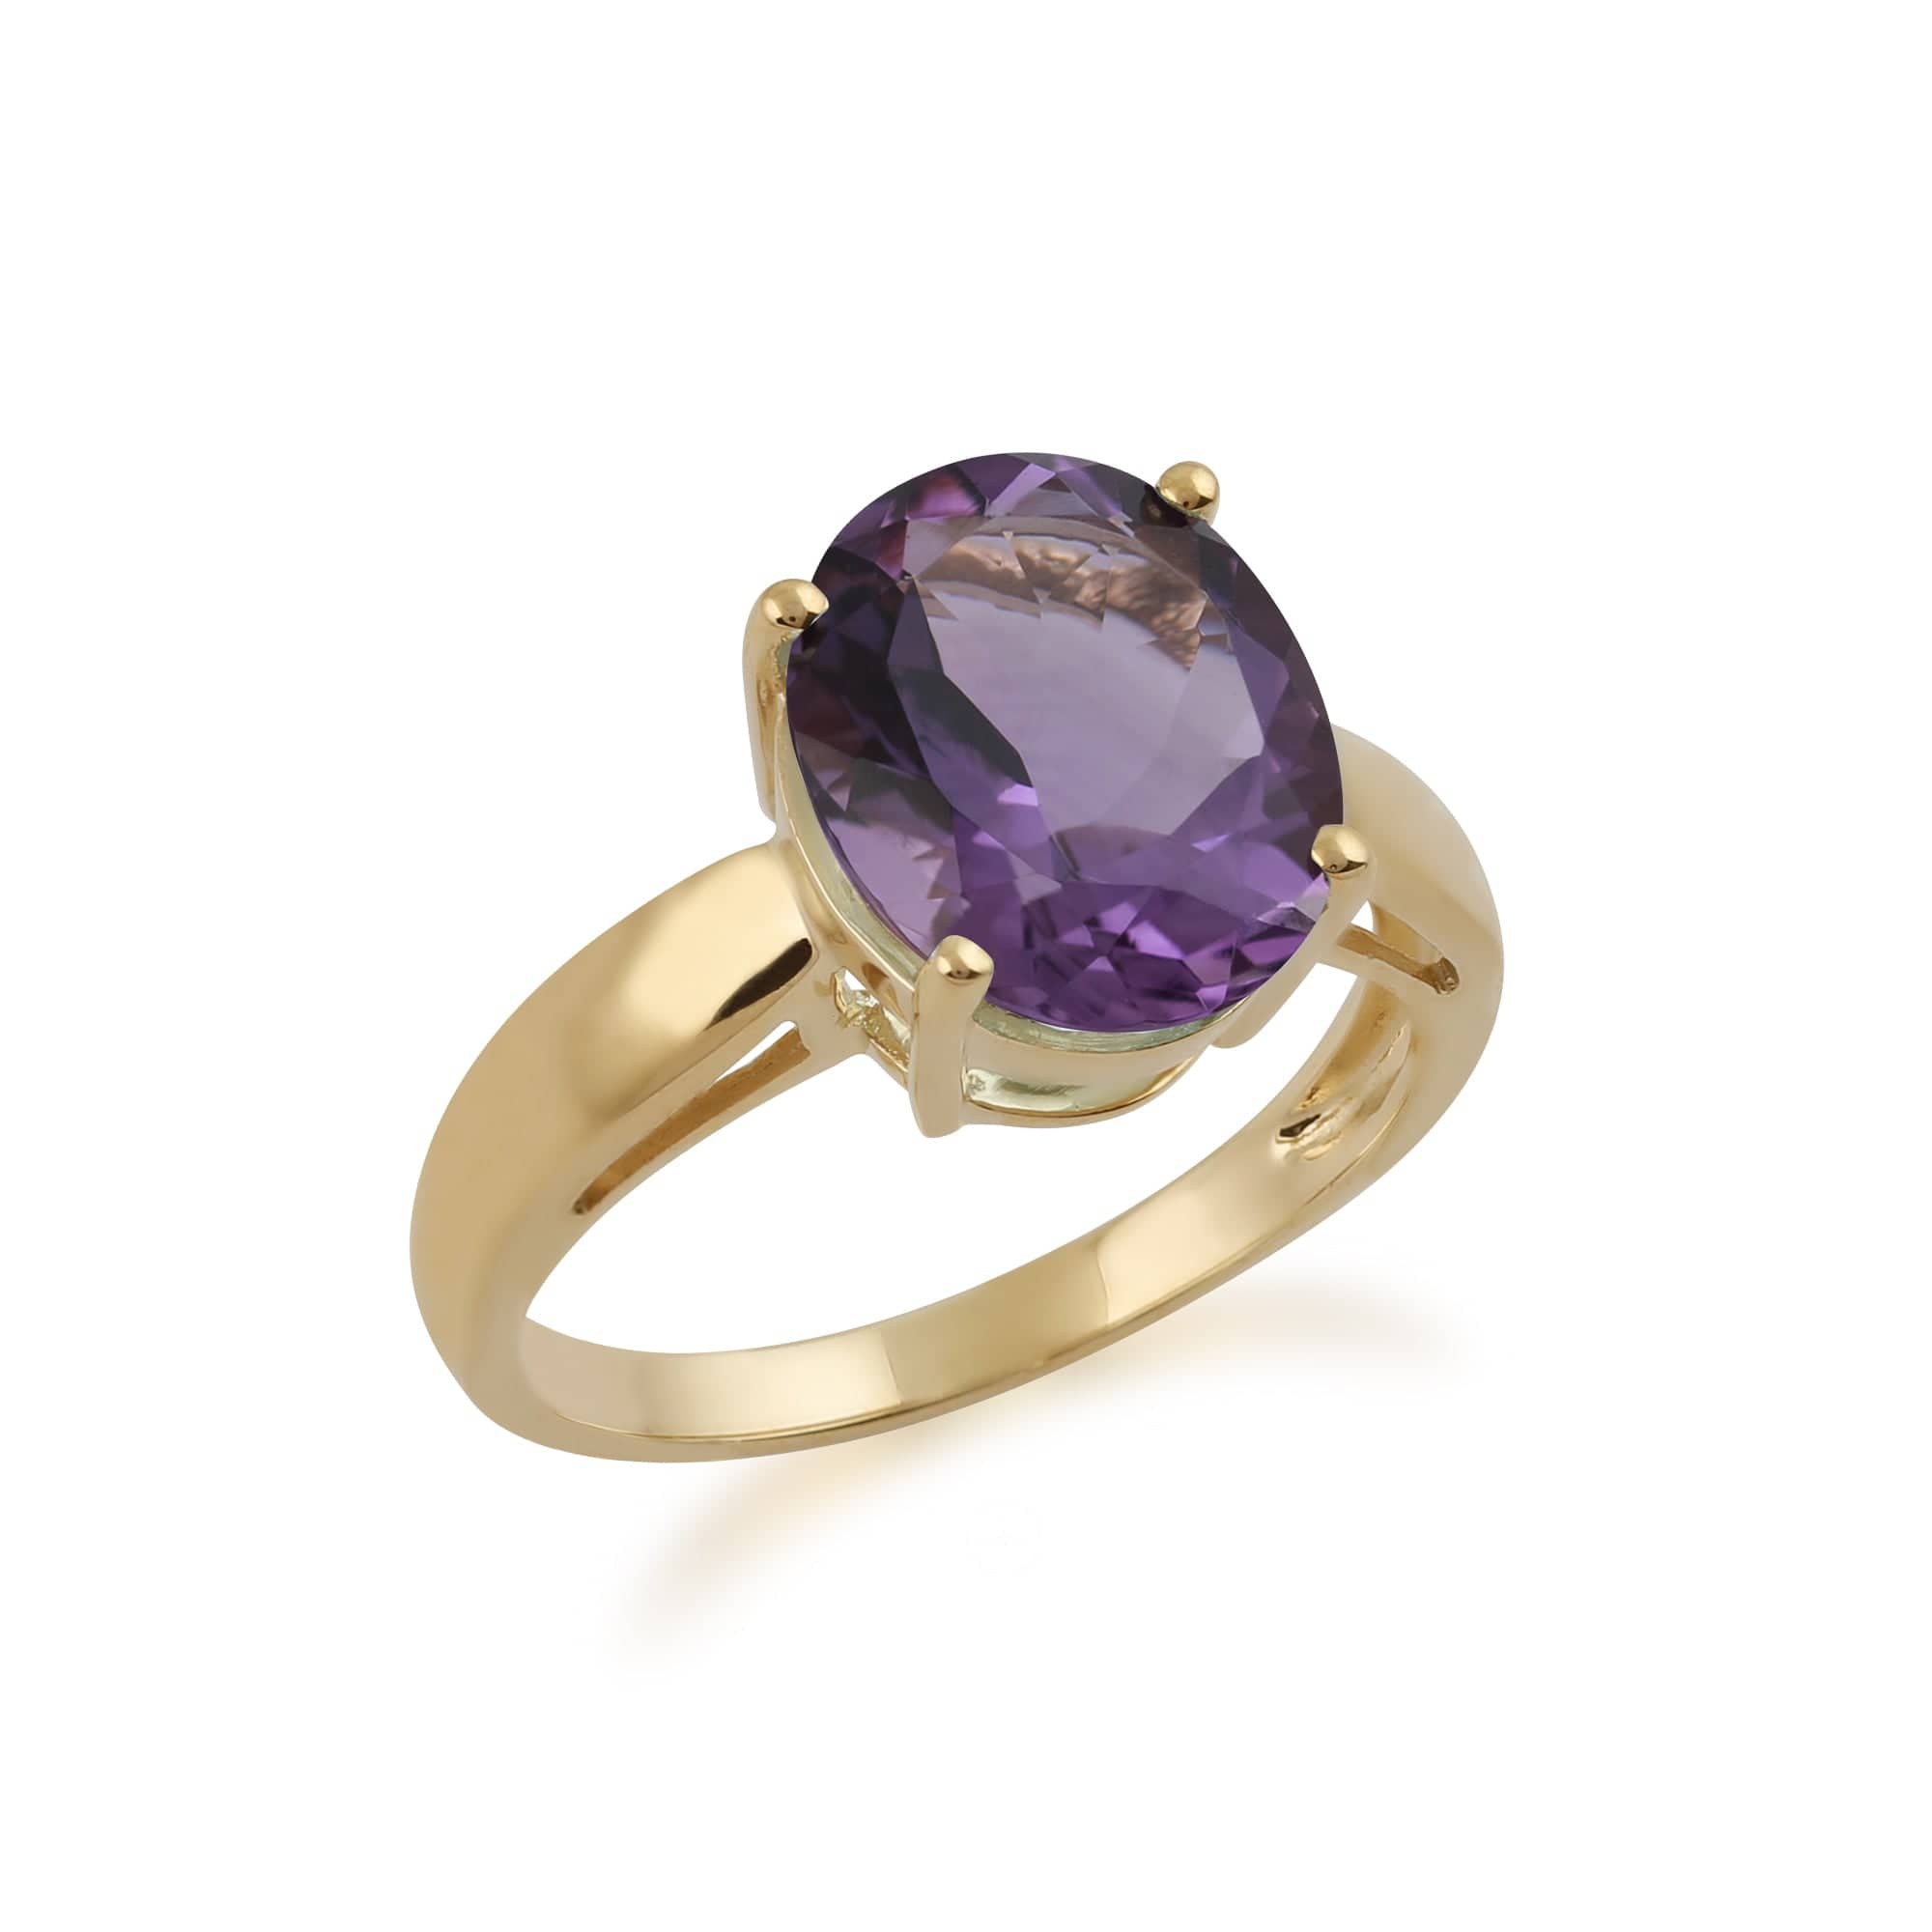 23497 9ct Yellow Gold 3.67ct Natural Amethyst Classic Single Stone Style Ring 2